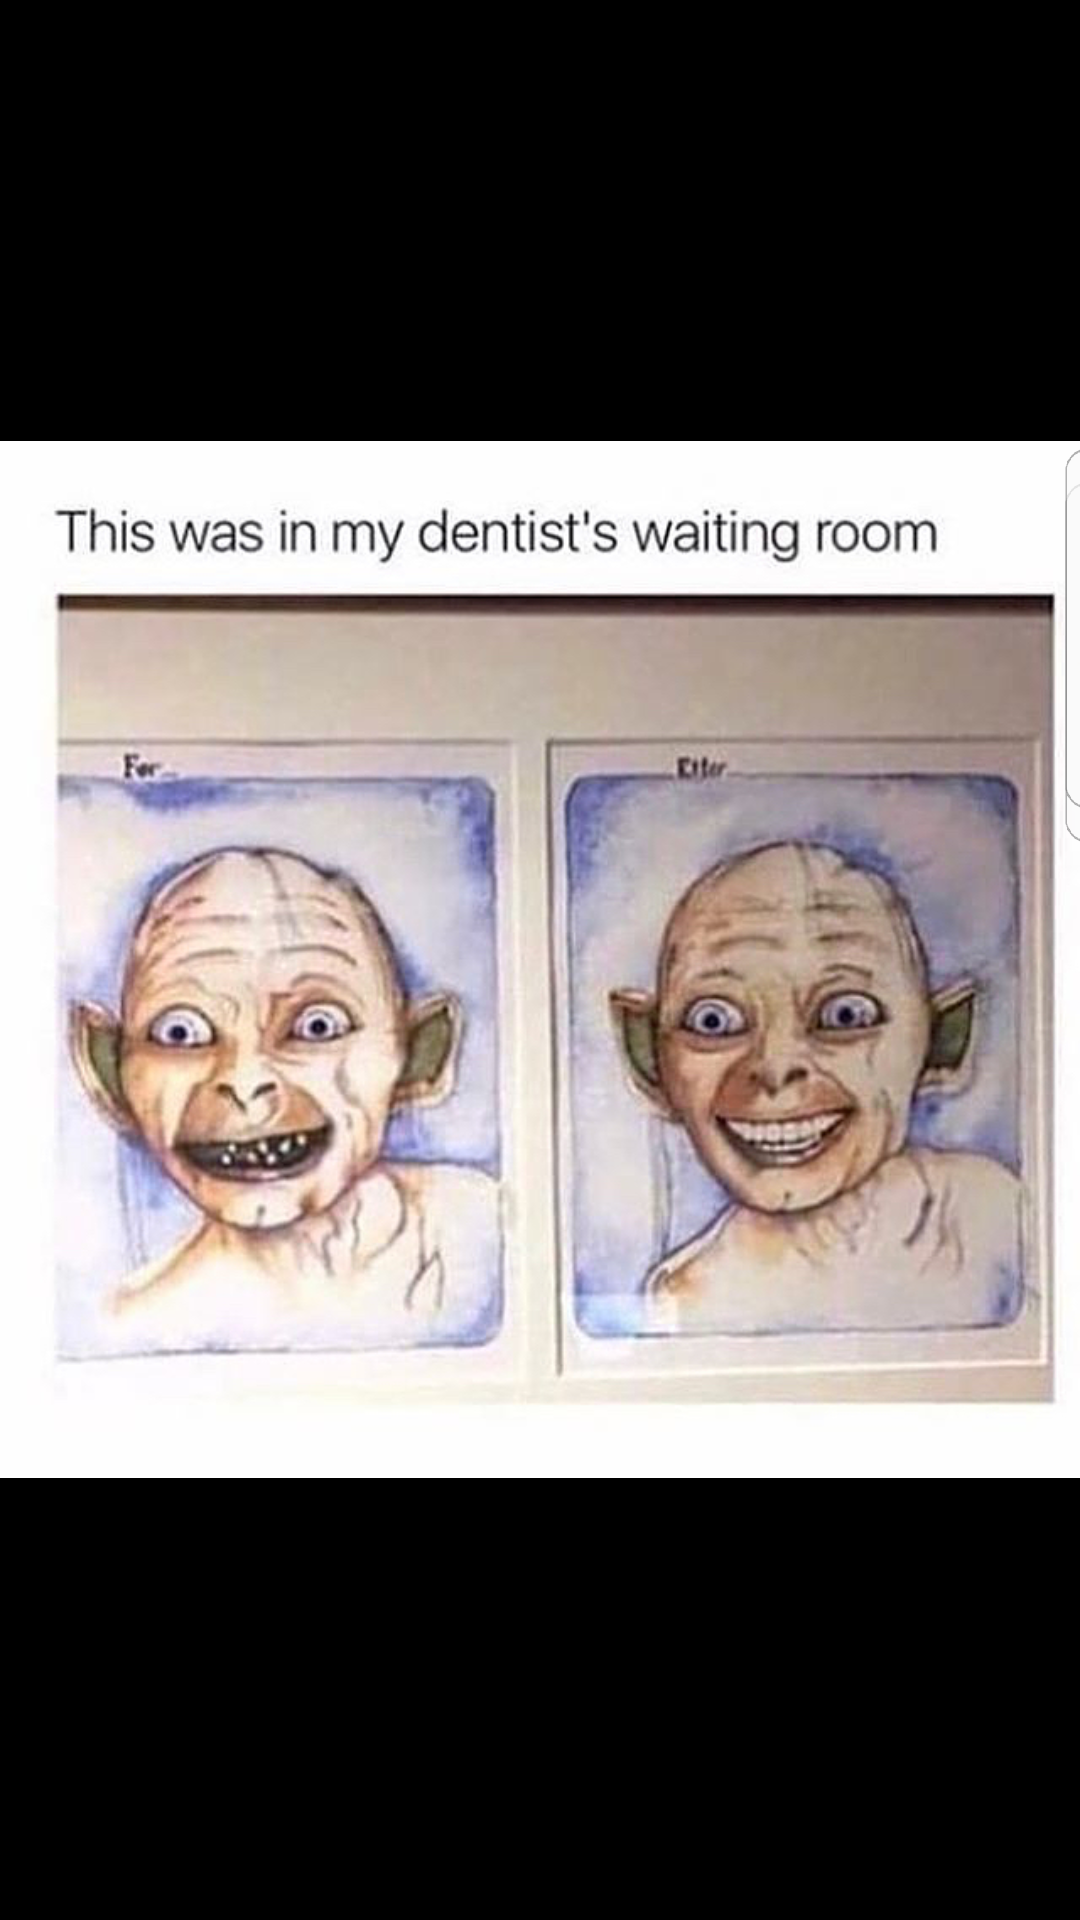 I went to the dentist, and...